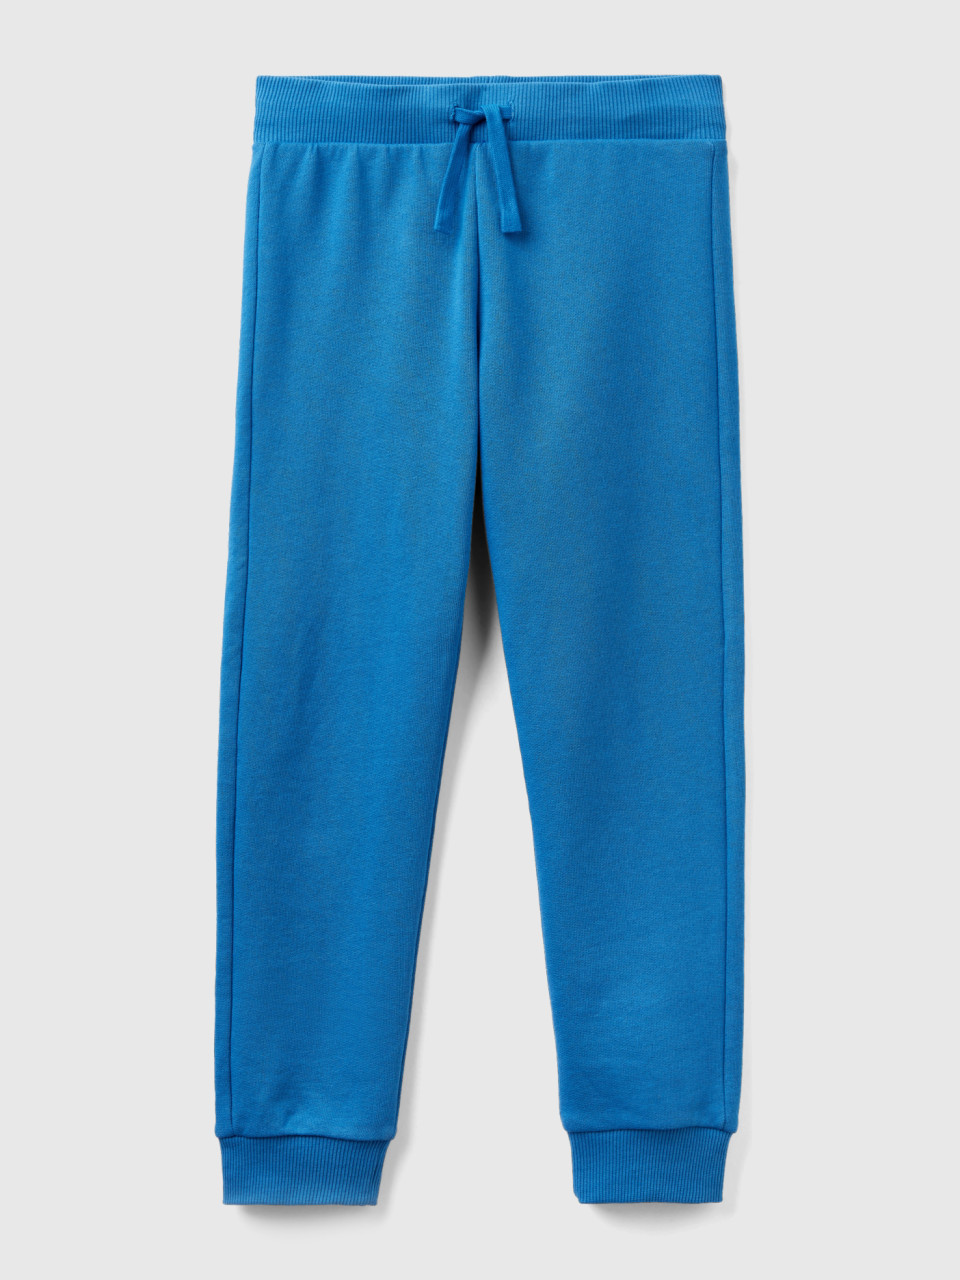 Benetton, Sporty Trousers With Drawstring, Blue, Kids